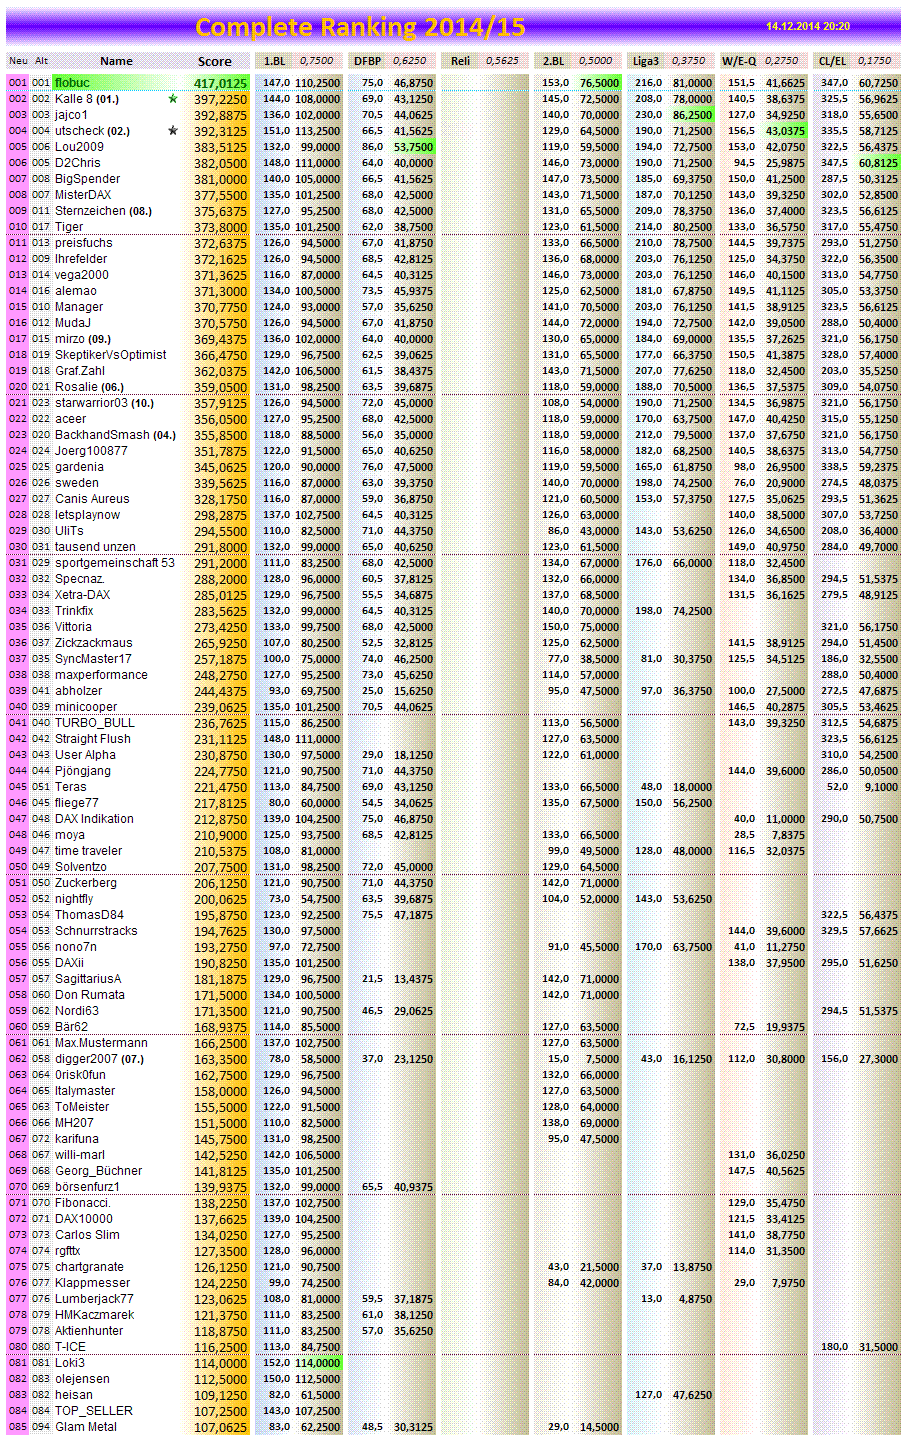 completeranking2014-15.png